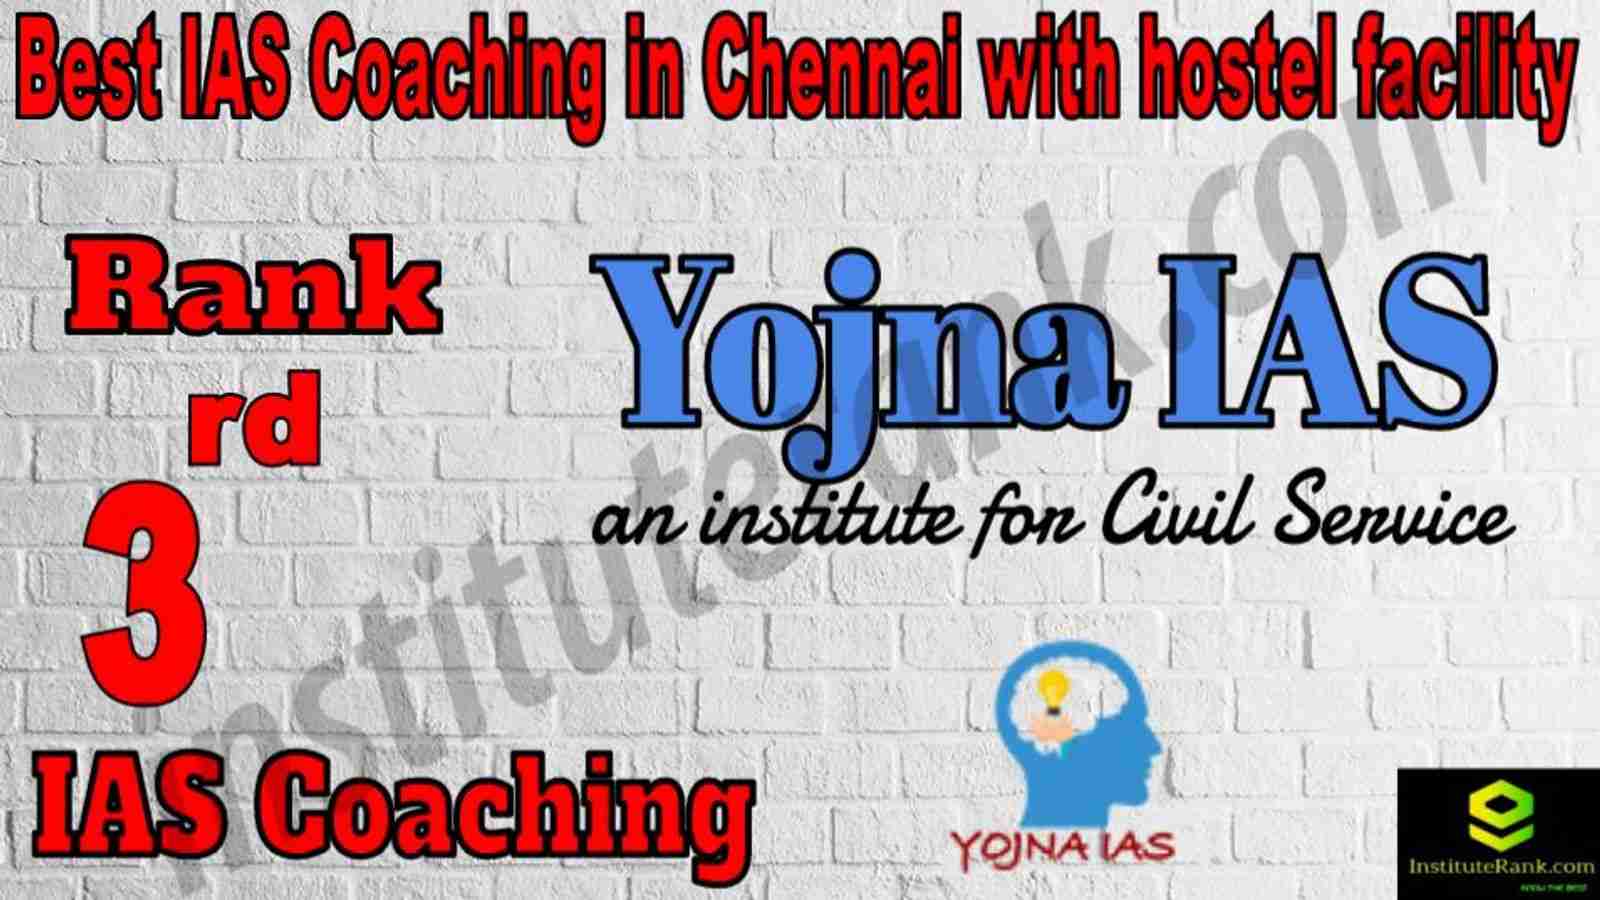 3rd Best IAS Coaching in Chennai with hostel facility